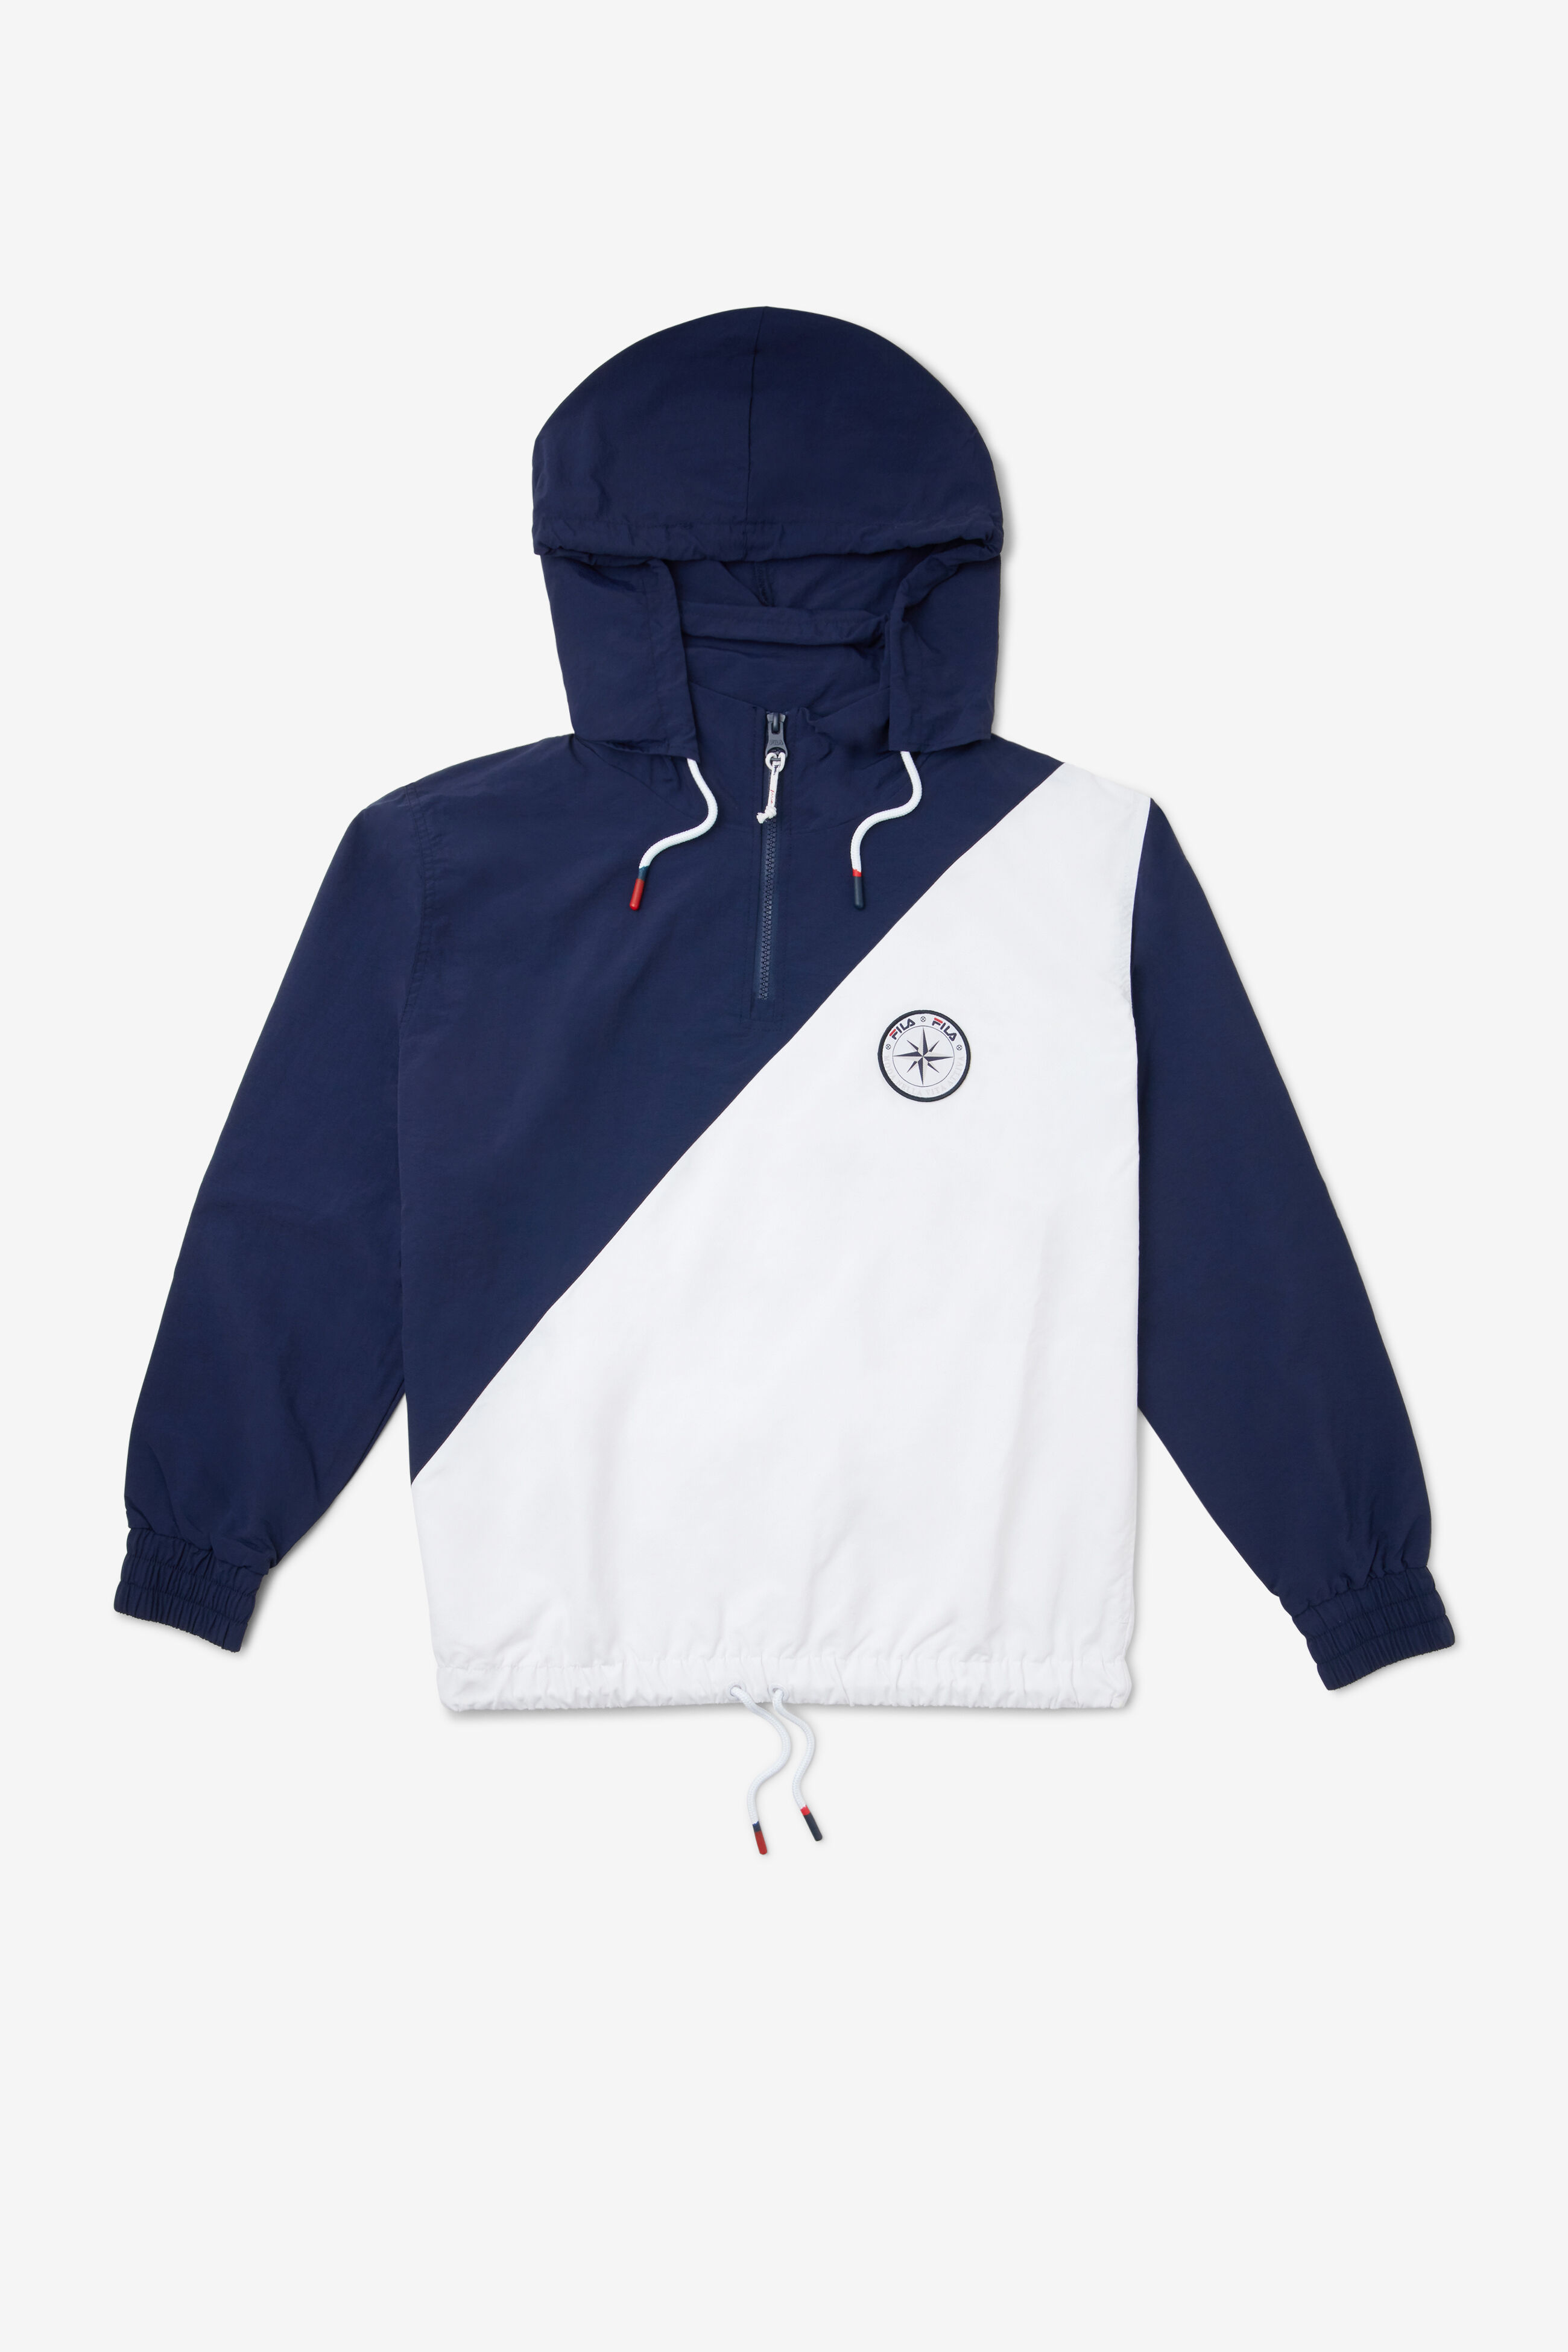 Fila White Line Dark Blue Jacket for men and women unisex, Men's Fashion,  Coats, Jackets and Outerwear on Carousell